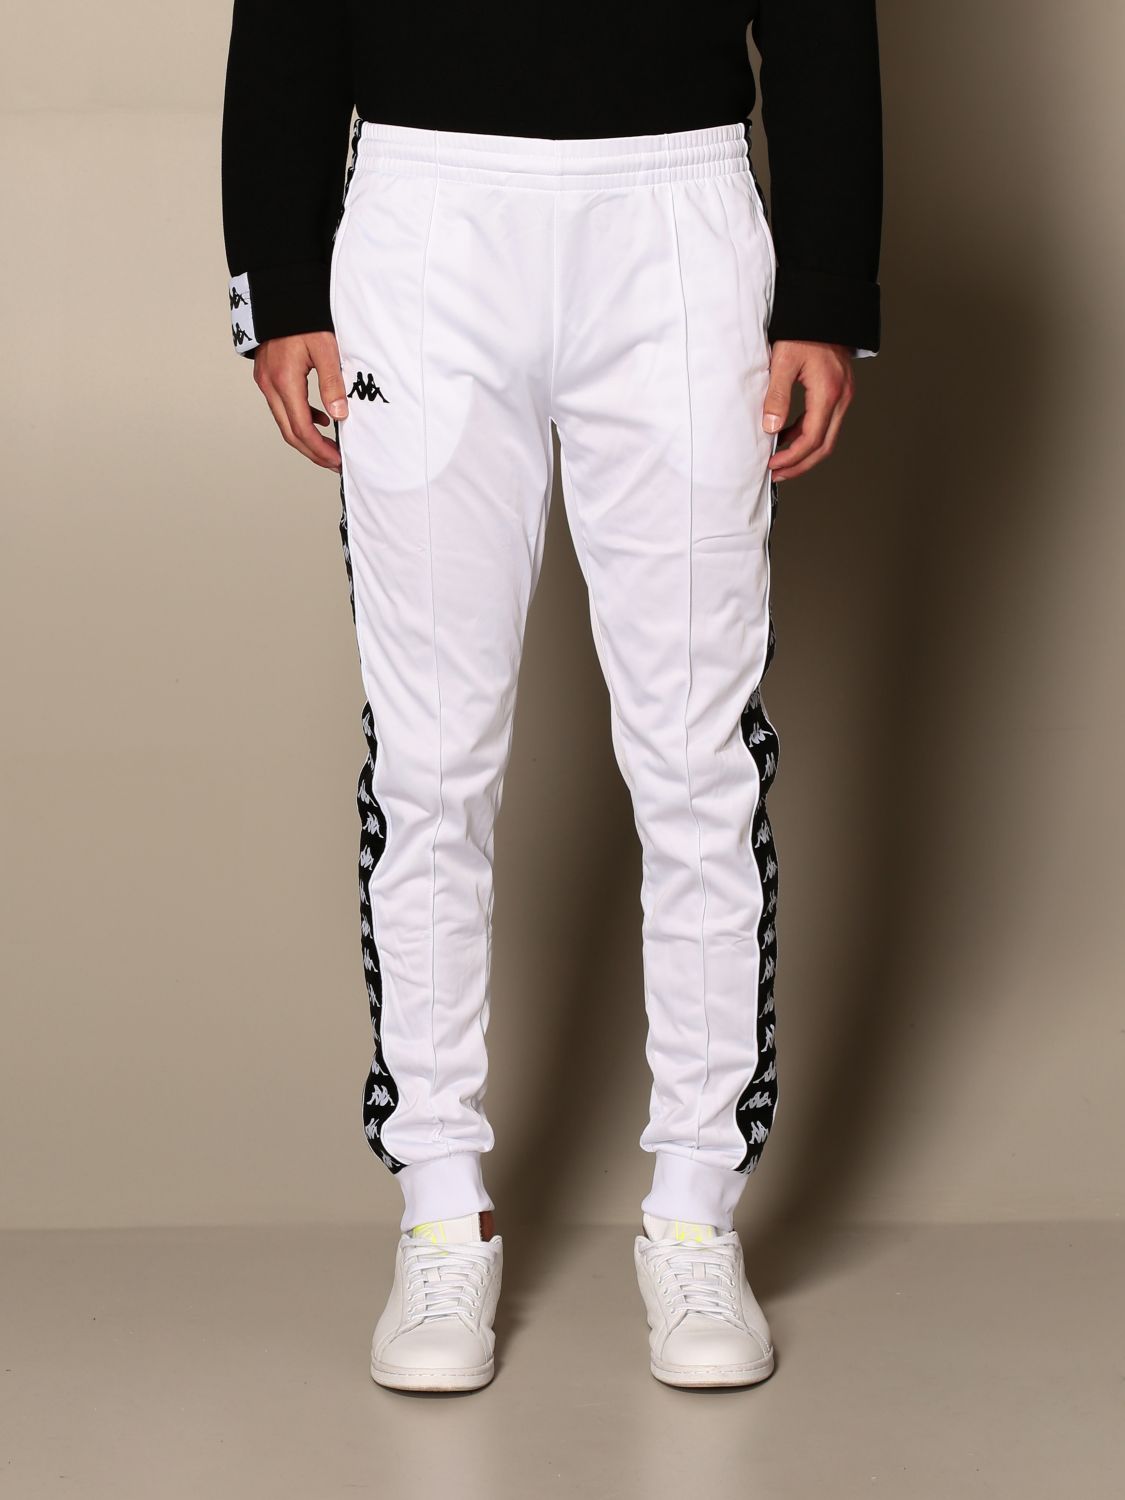 Mediaan Pa compileren KAPPA: jogging trousers with logoed bands - Black | Kappa pants 303KUC0  online on GIGLIO.COM